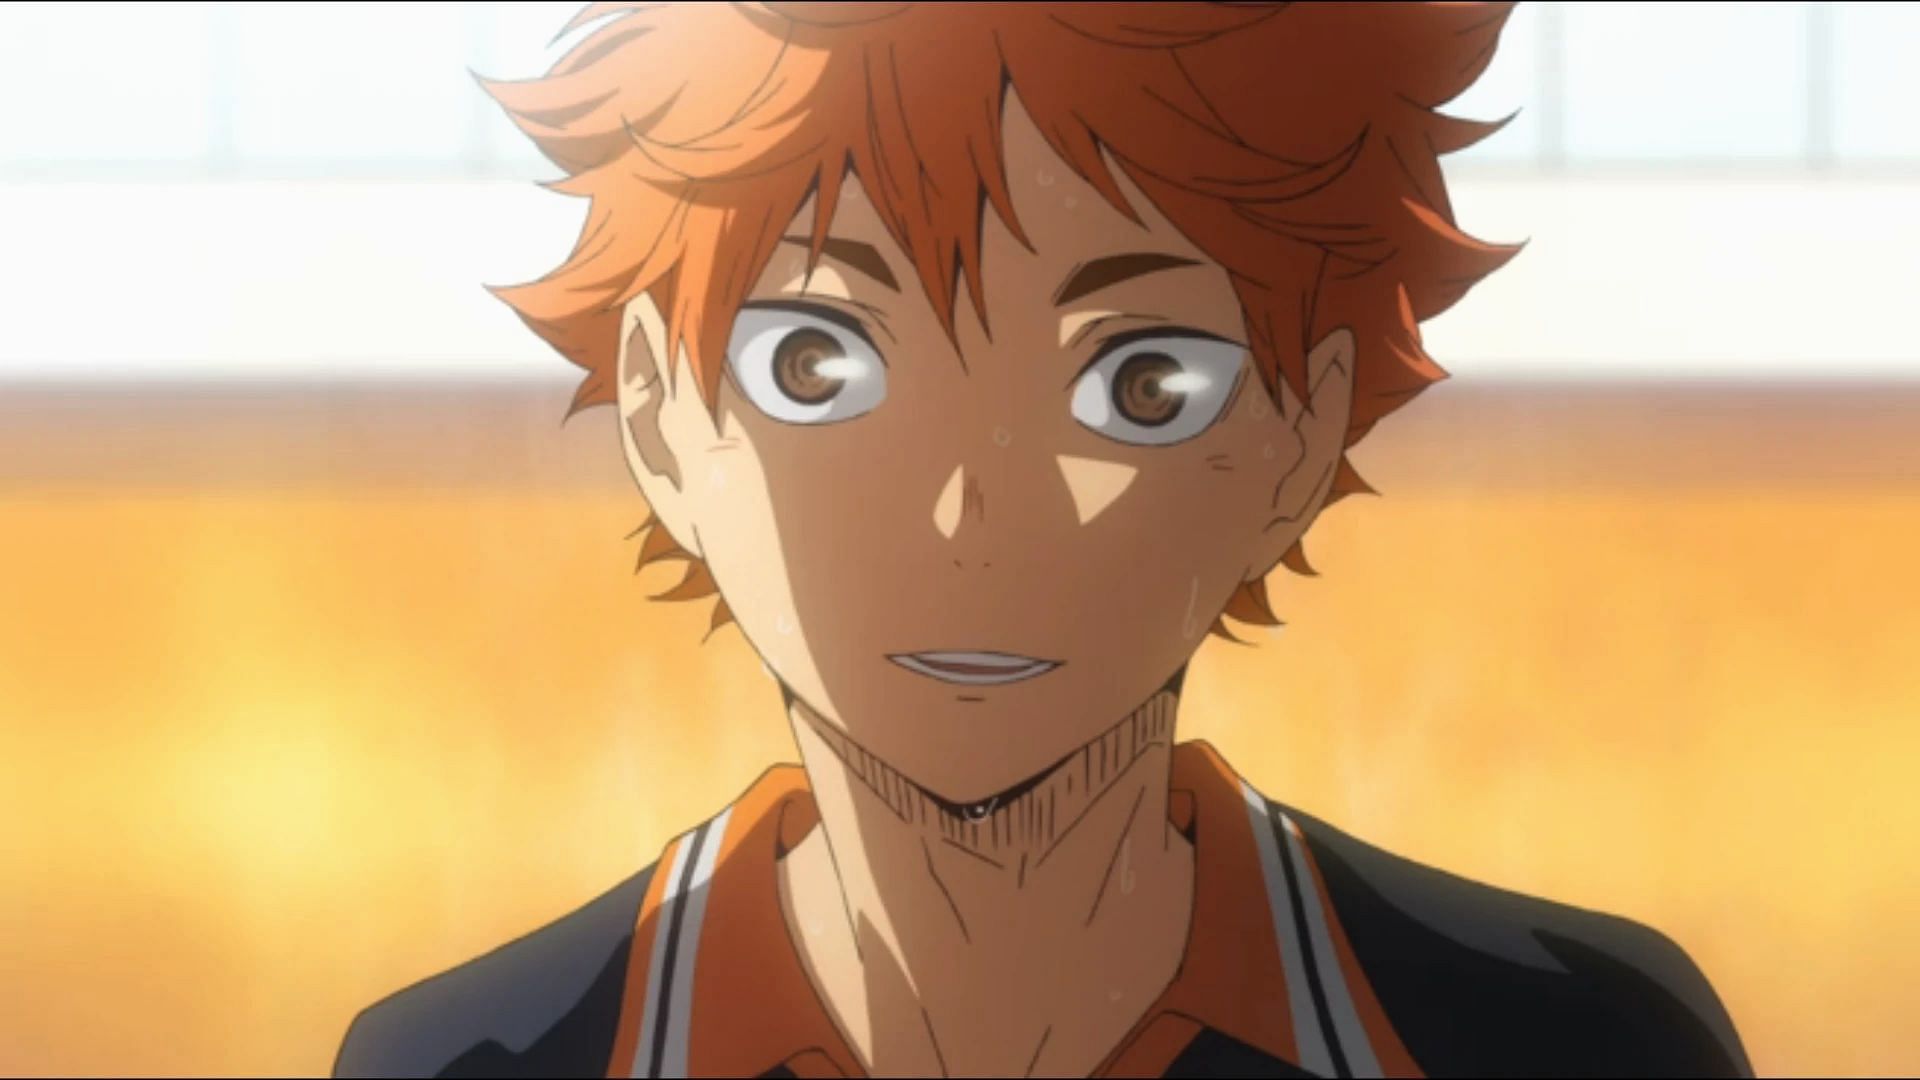 Hinata earns the top spot among the most popular sports anime characters (Image via Production I.G)